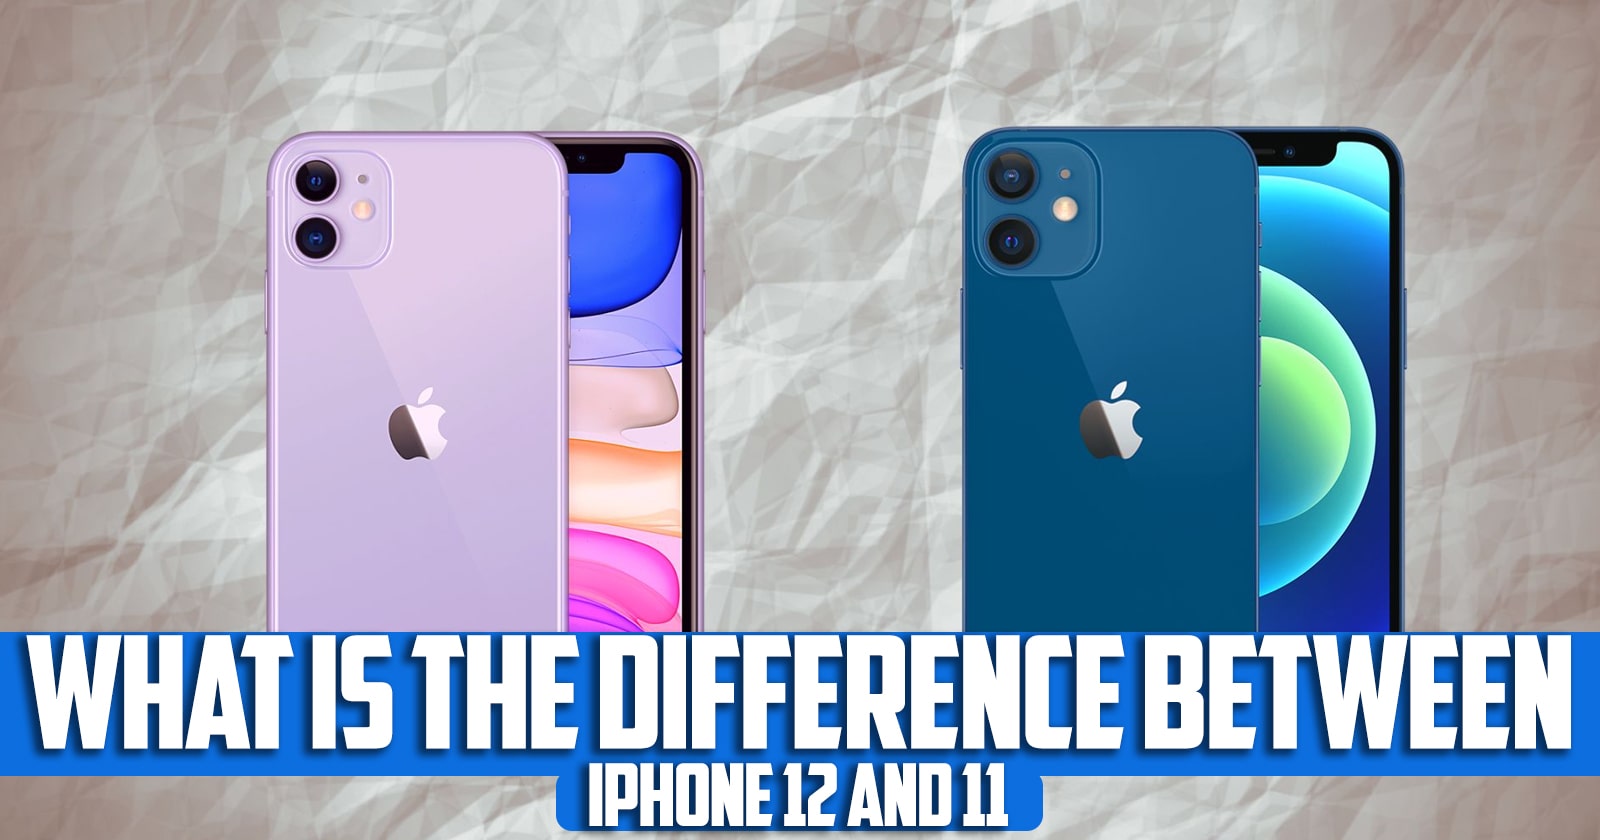 What is the difference between the iPhone 12 and 11?